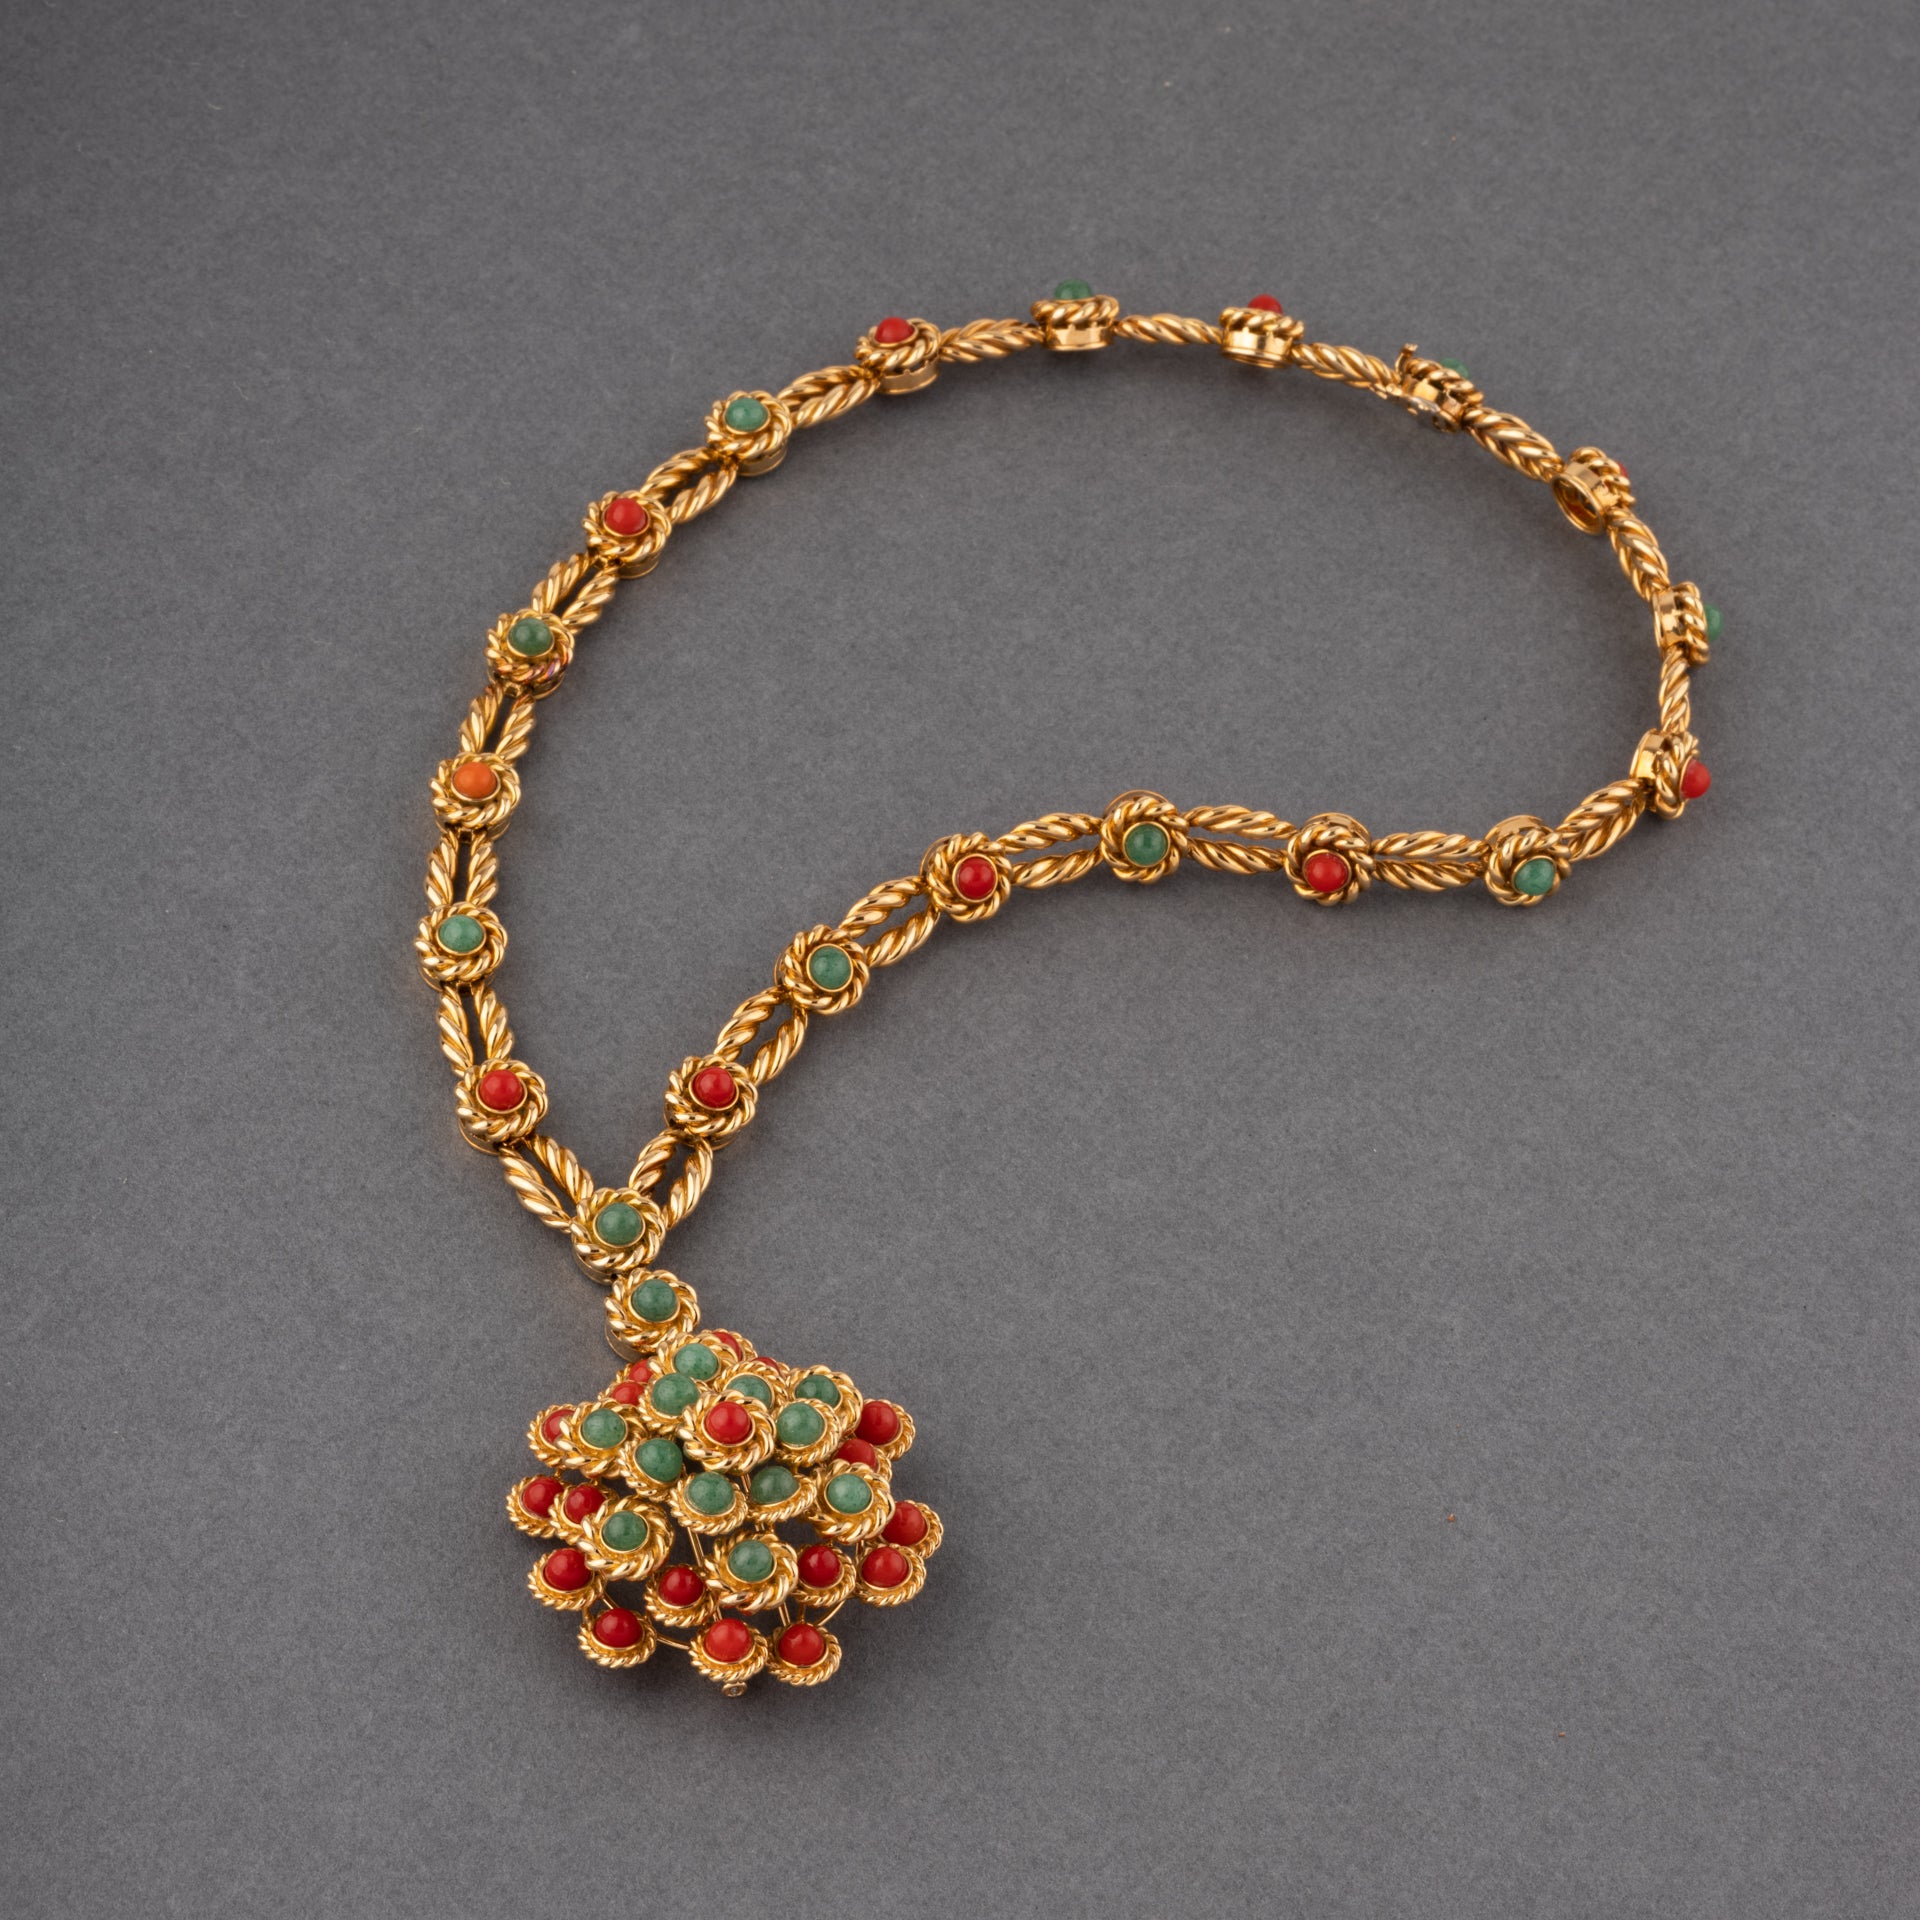 A very beautiful pendant necklace, made in France circa 1960.
Made in yellow gold 18k, it is important: 174 grams.
French hallmarks for 18k gold: the eagle head.
Set with coral and aventurine cabochons. The length is 47 cm or 18.8 inches.
The